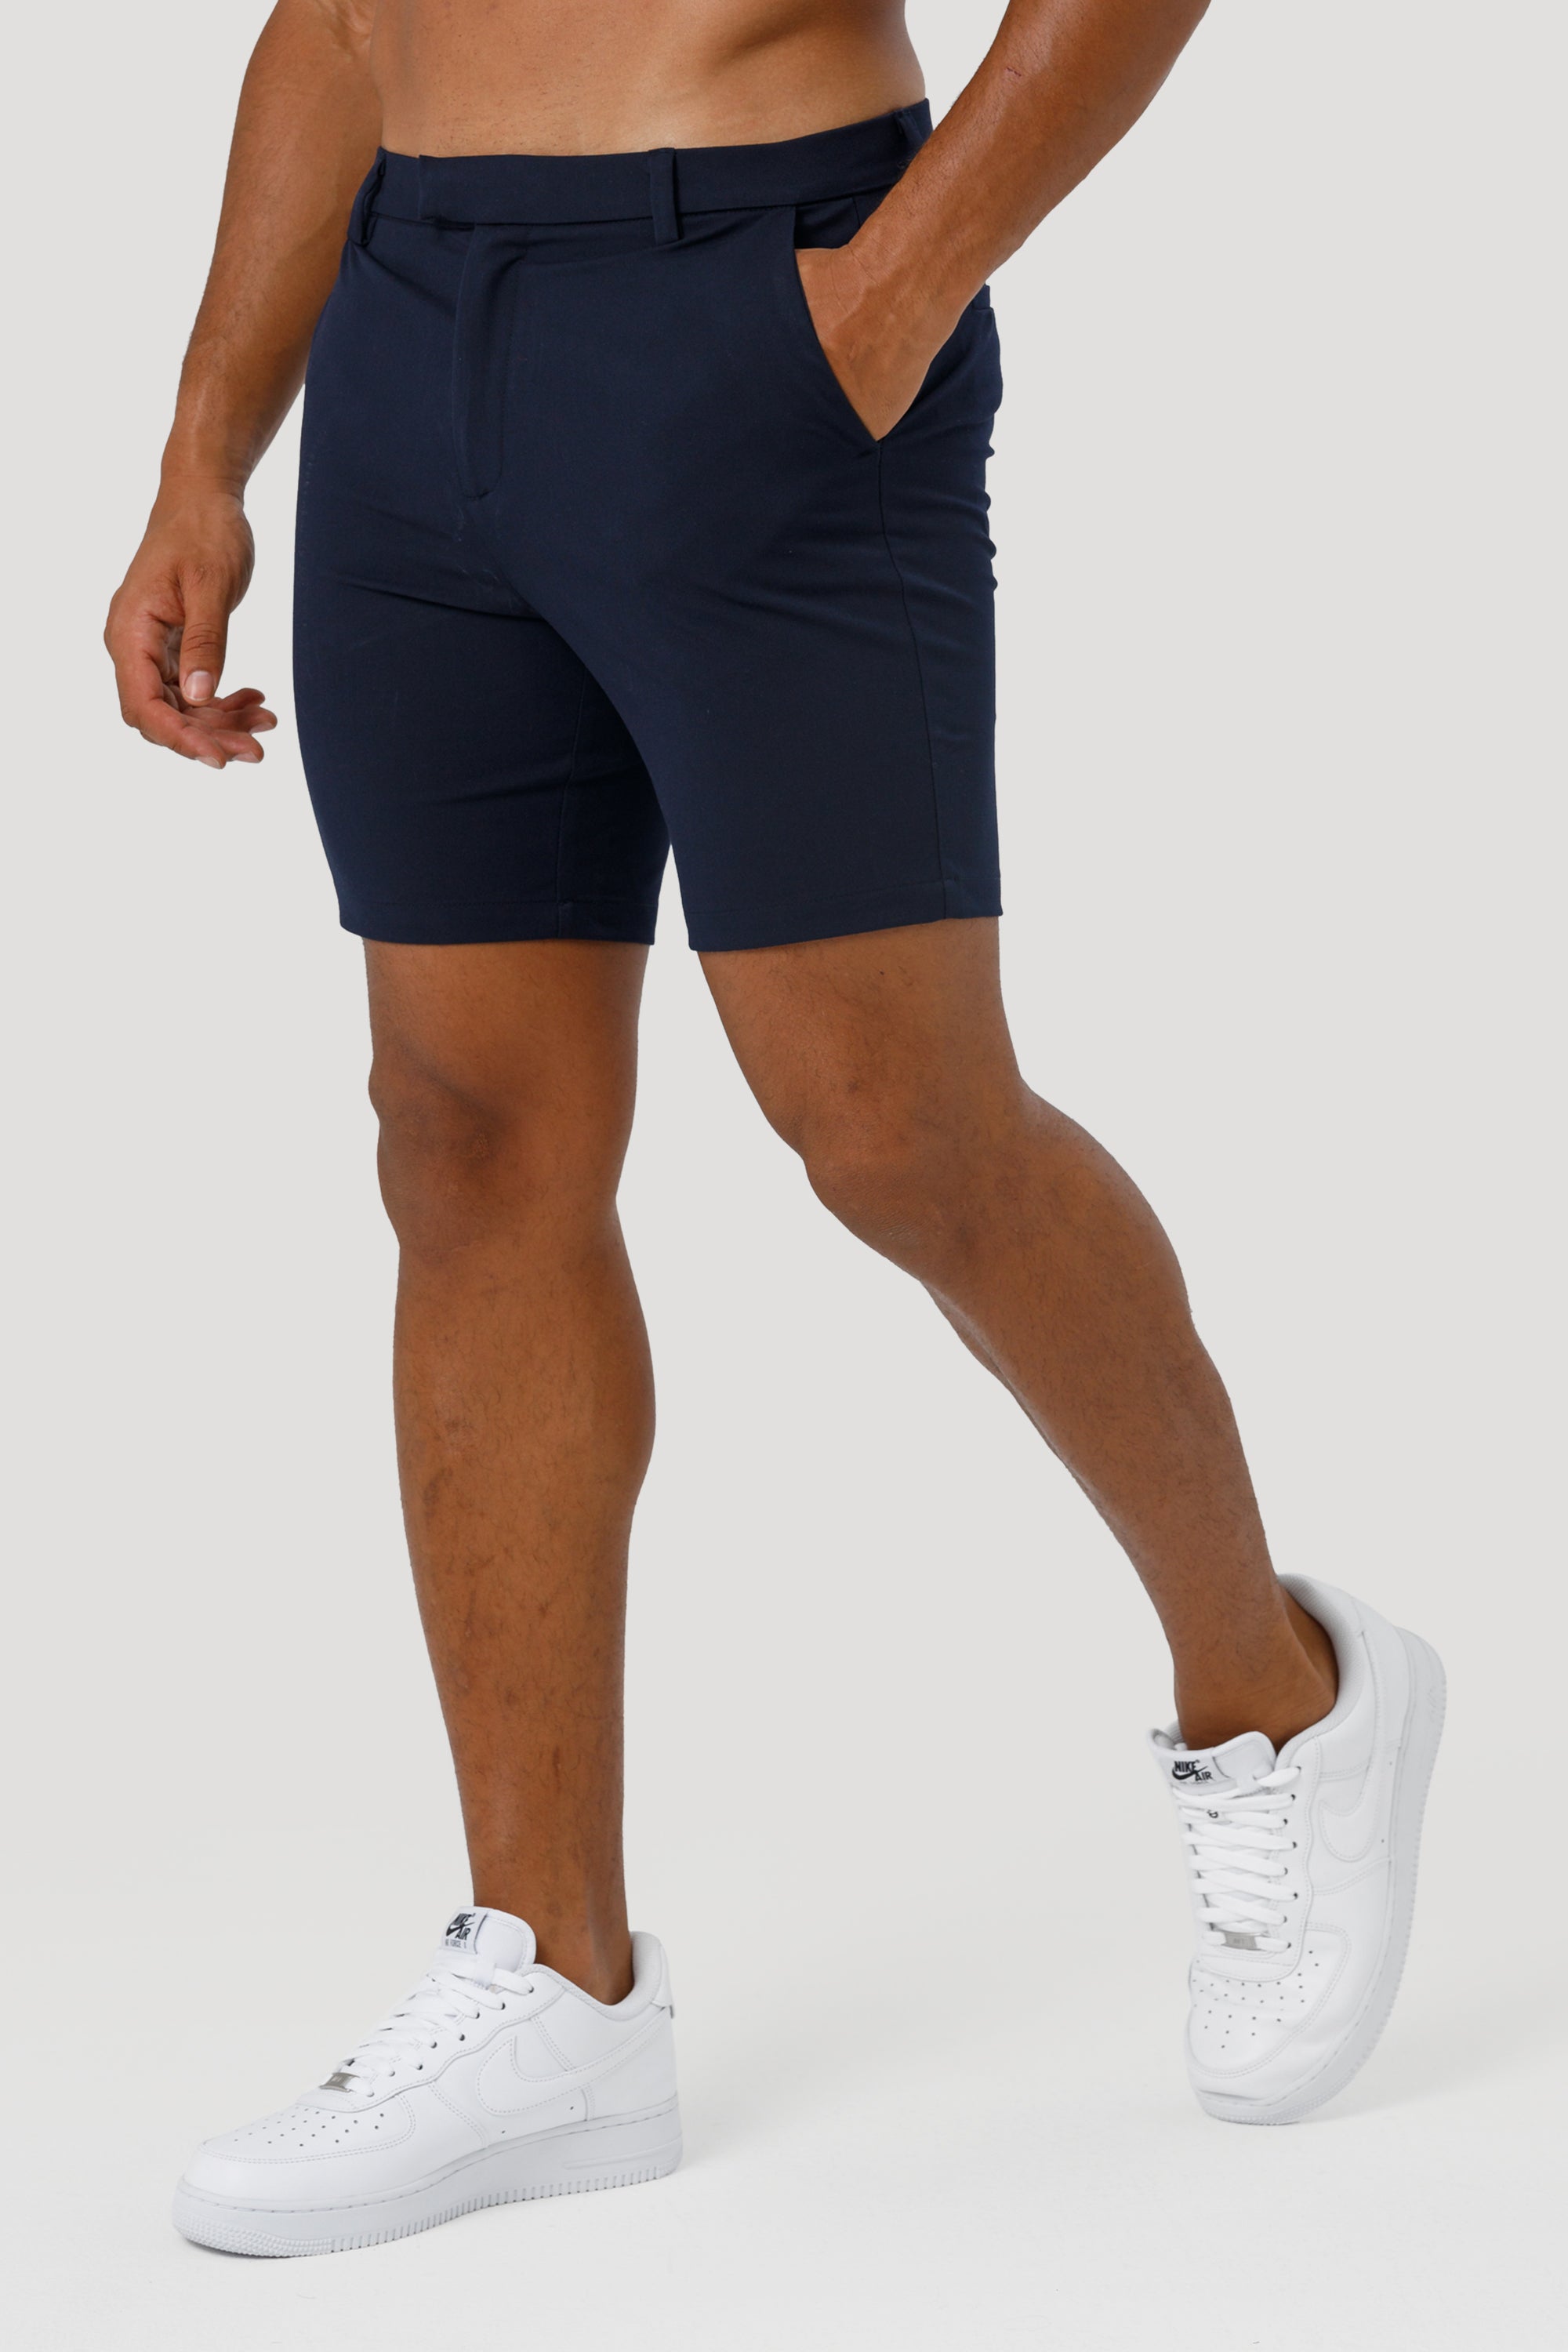 THE LUCIA SHORTS - NAVY BLUE